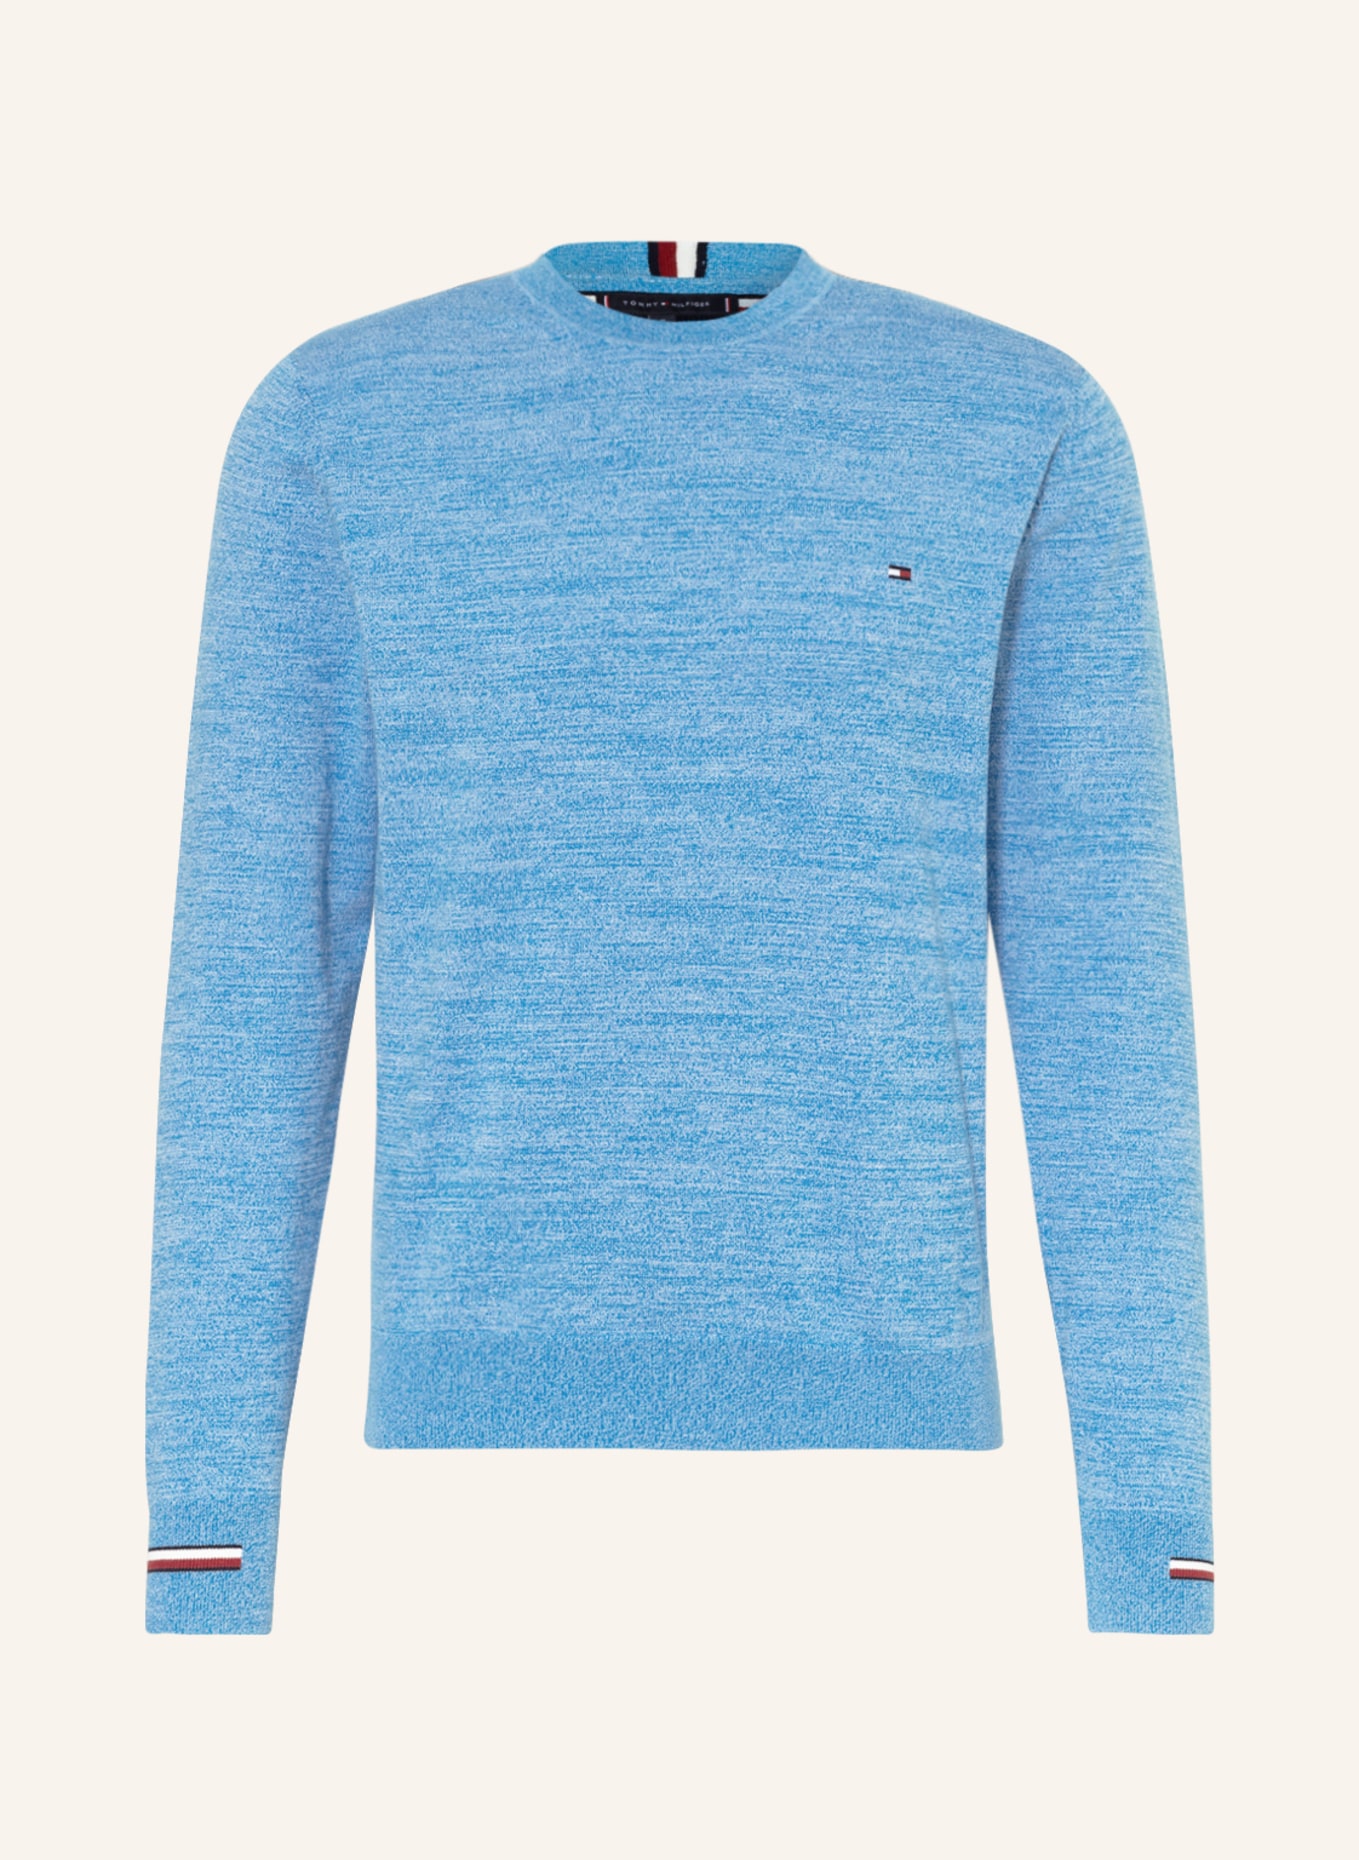 TOMMY HILFIGER Sweater in blue